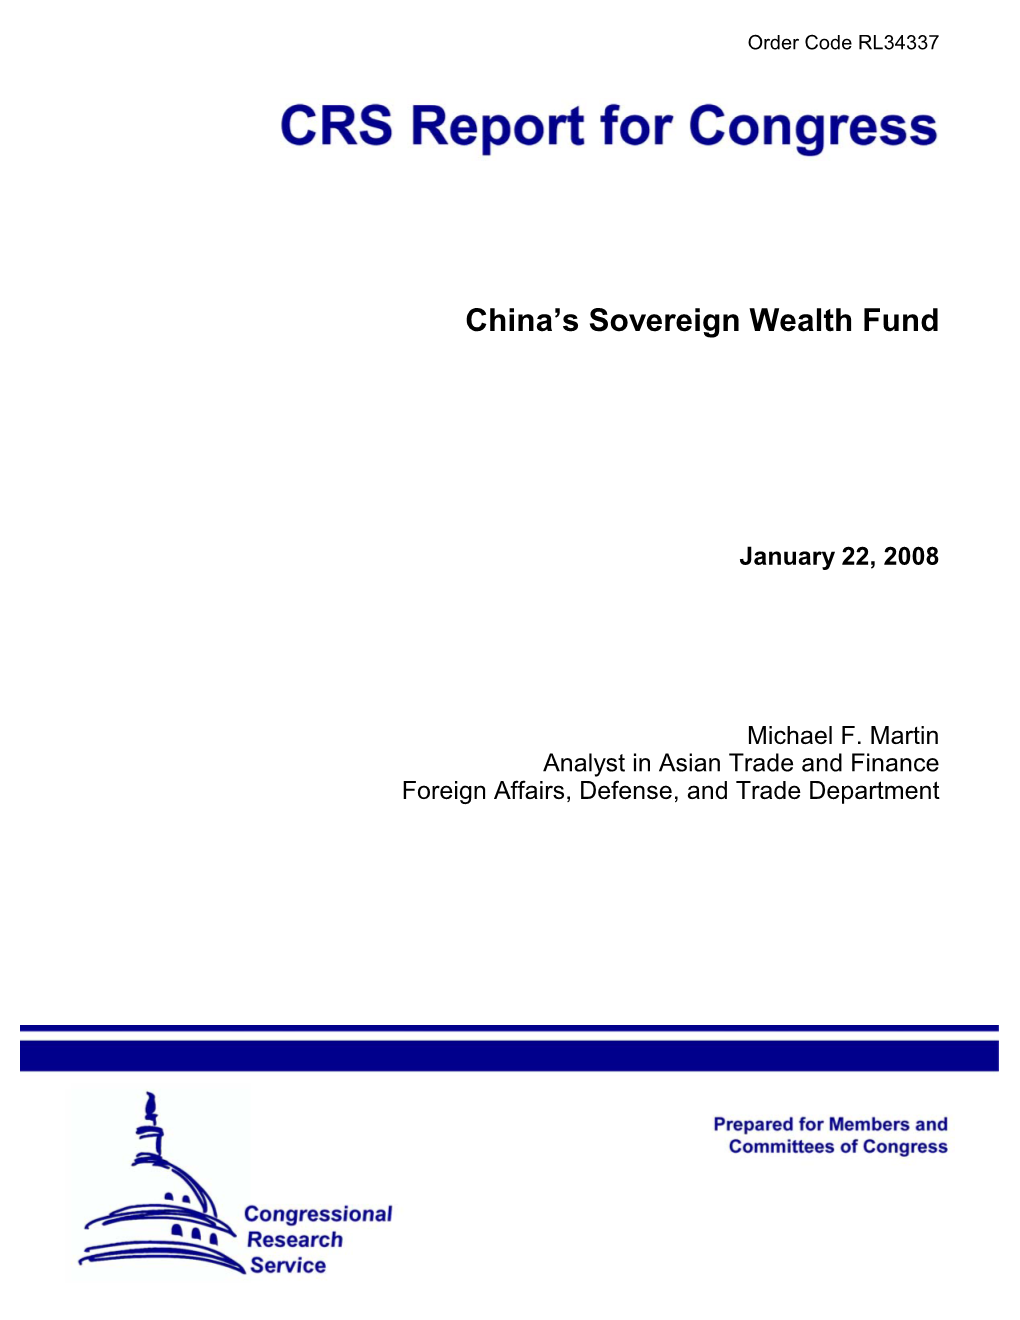 China's Sovereign Wealth Fund